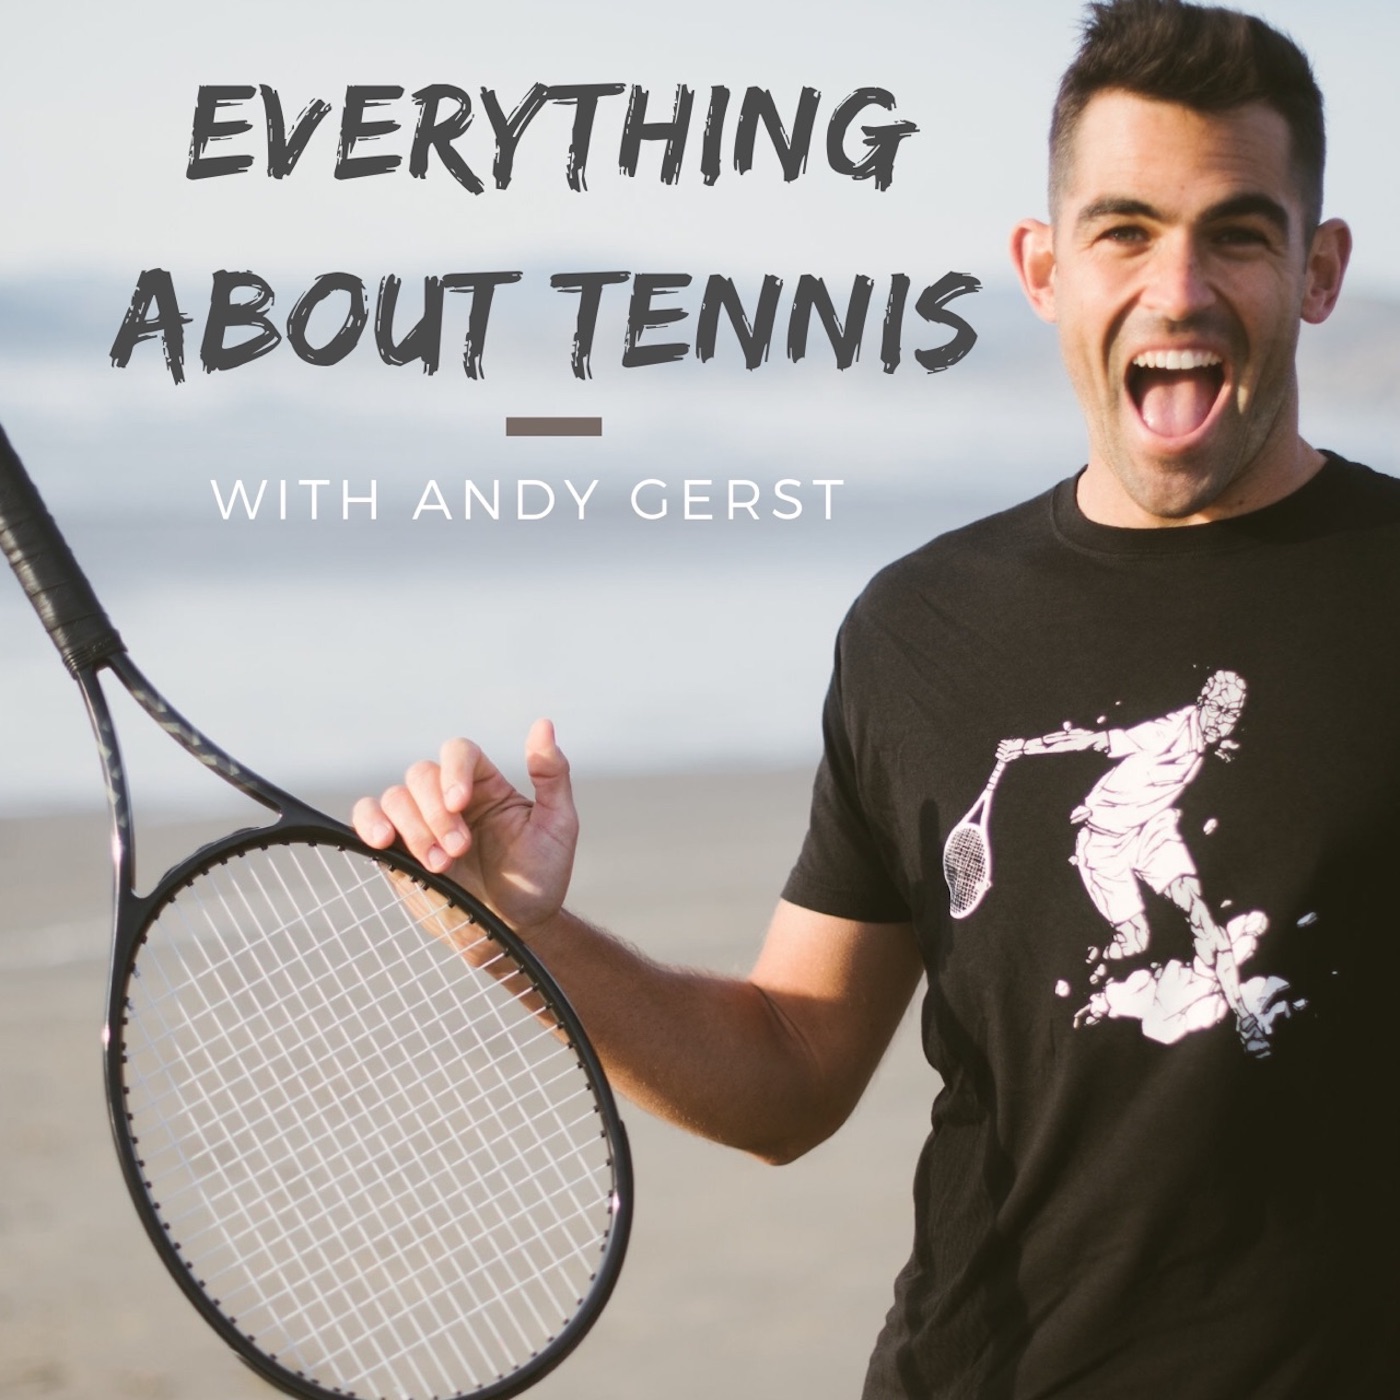 Stream Everything About Tennis with Andy Gerst Listen to podcast episodes online for free on SoundCloud